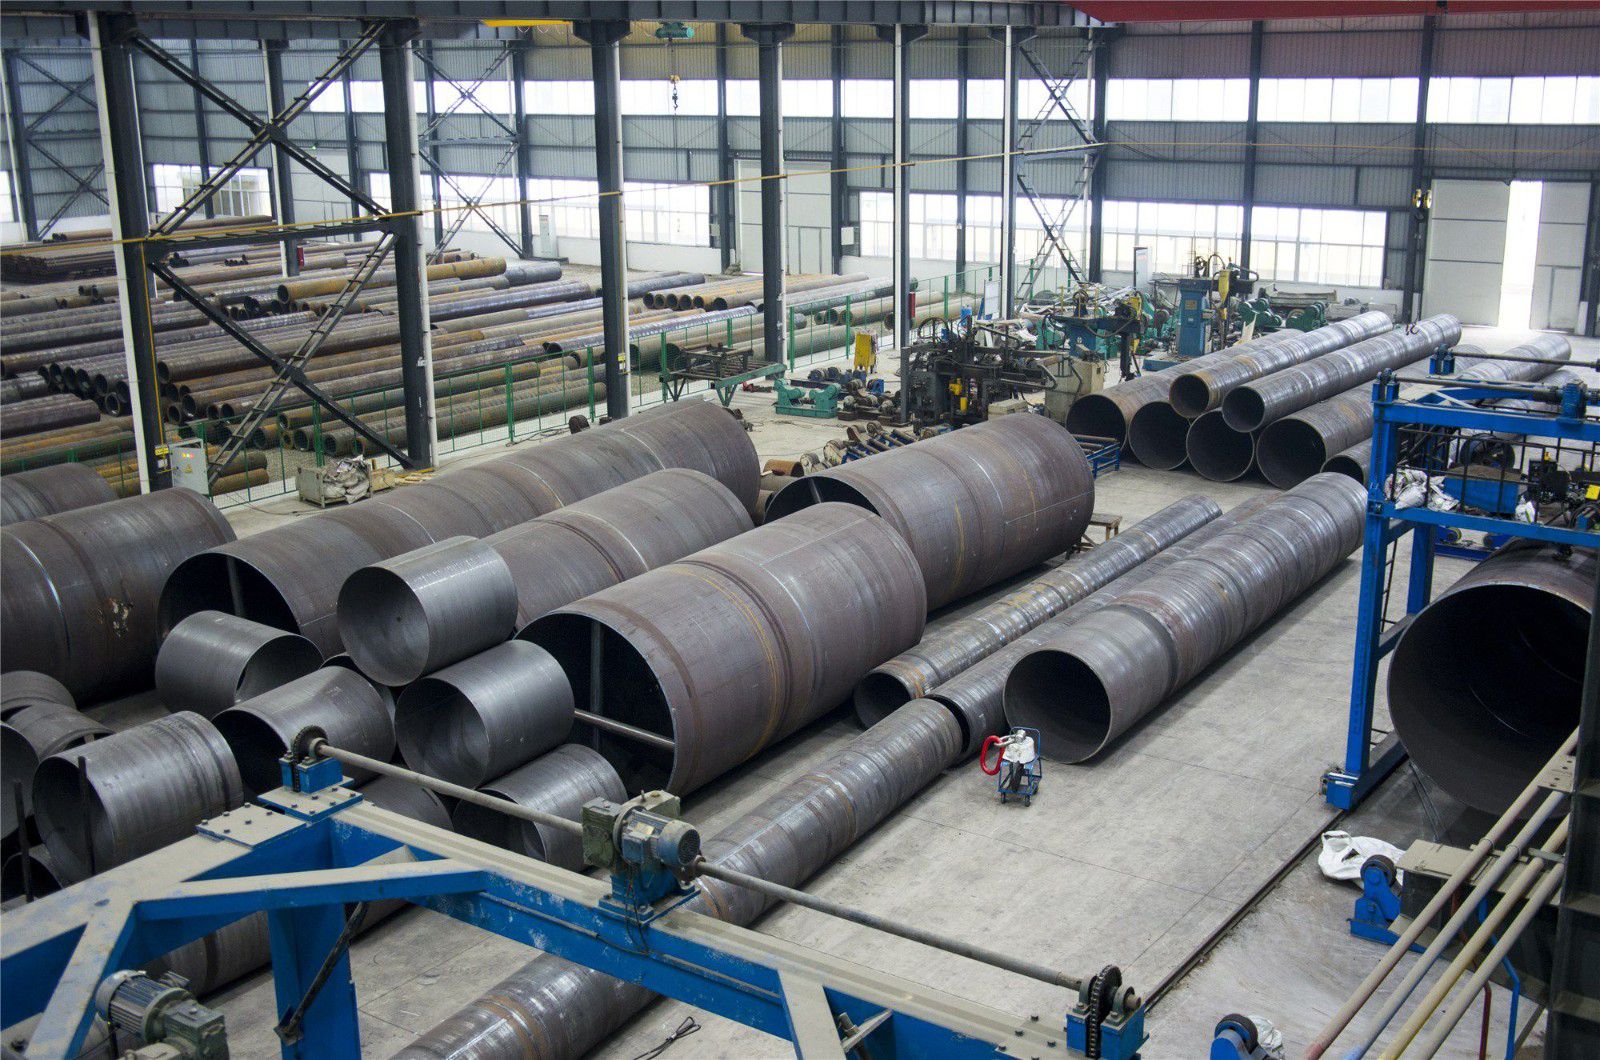 BrooklynQ235B large diameter thick wall coiled pipeA brief introduction to the production process